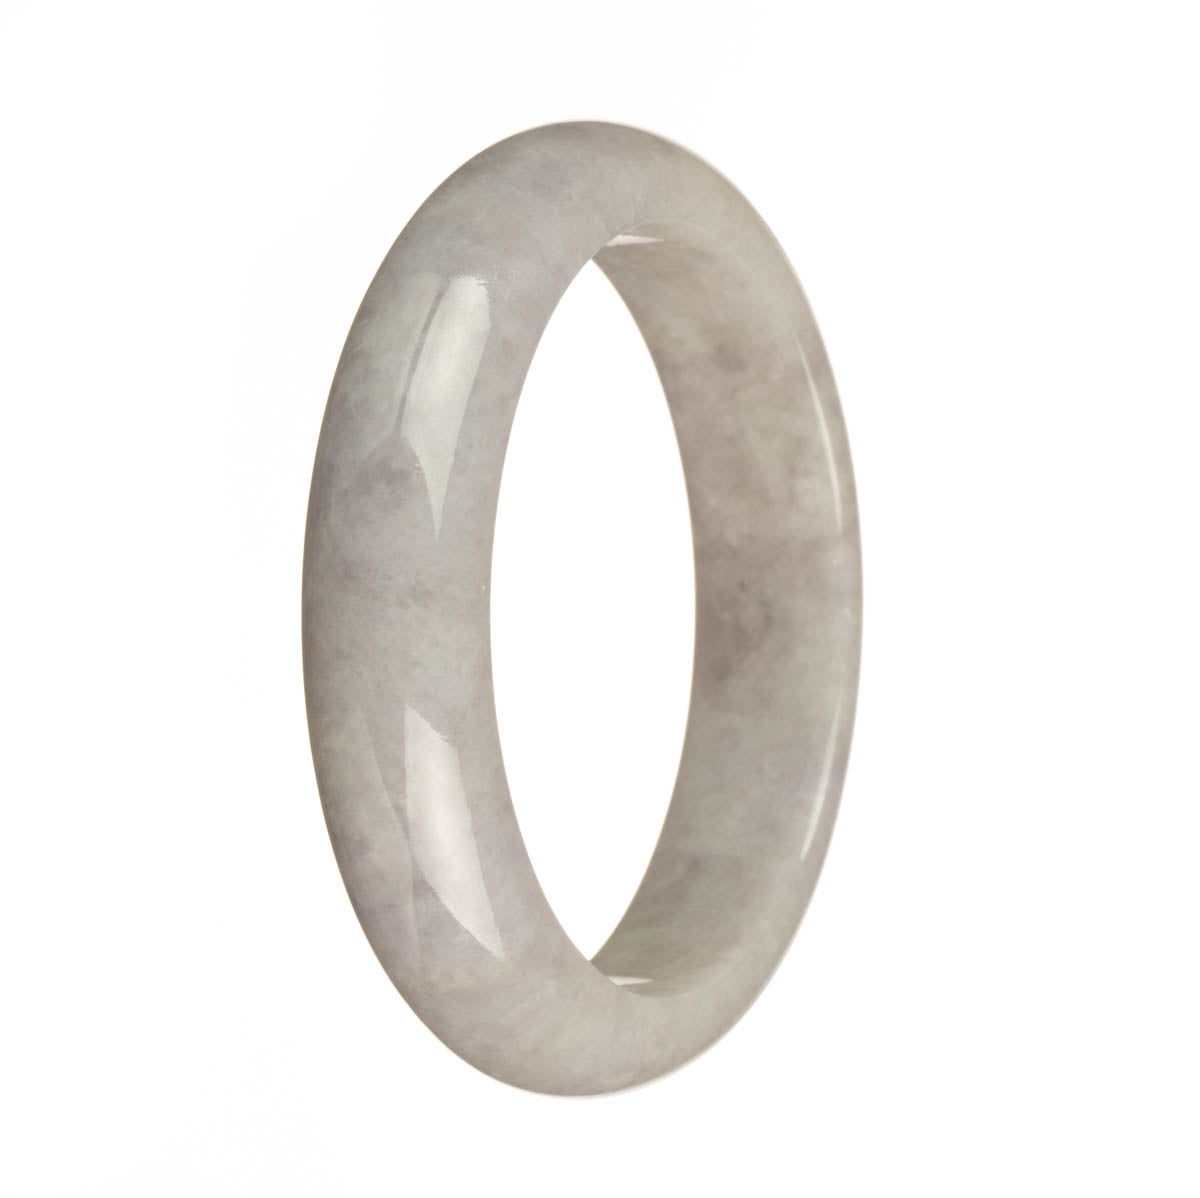 A lavender jadeite jade bangle bracelet in a half moon shape, untreated and genuine, measuring 61mm in size. Perfect for adding a touch of natural beauty to any outfit.